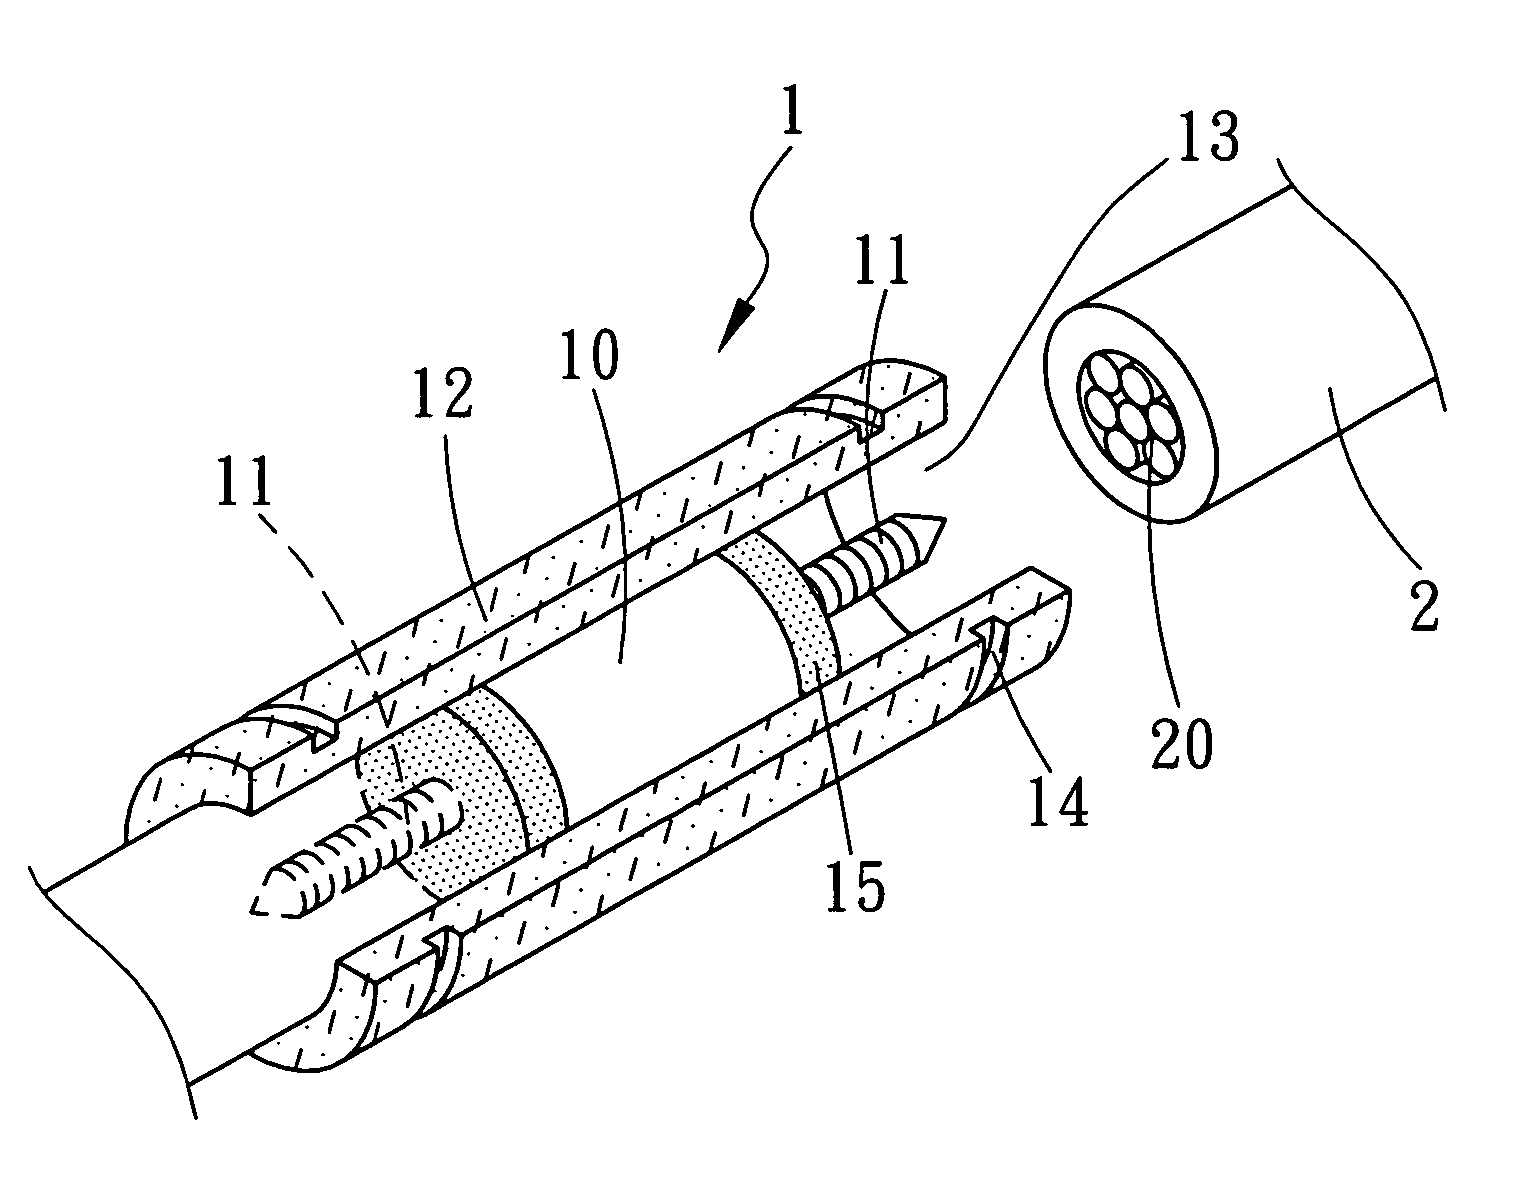 Ignition enhancement device for enhancing ignition efficiency of car engine